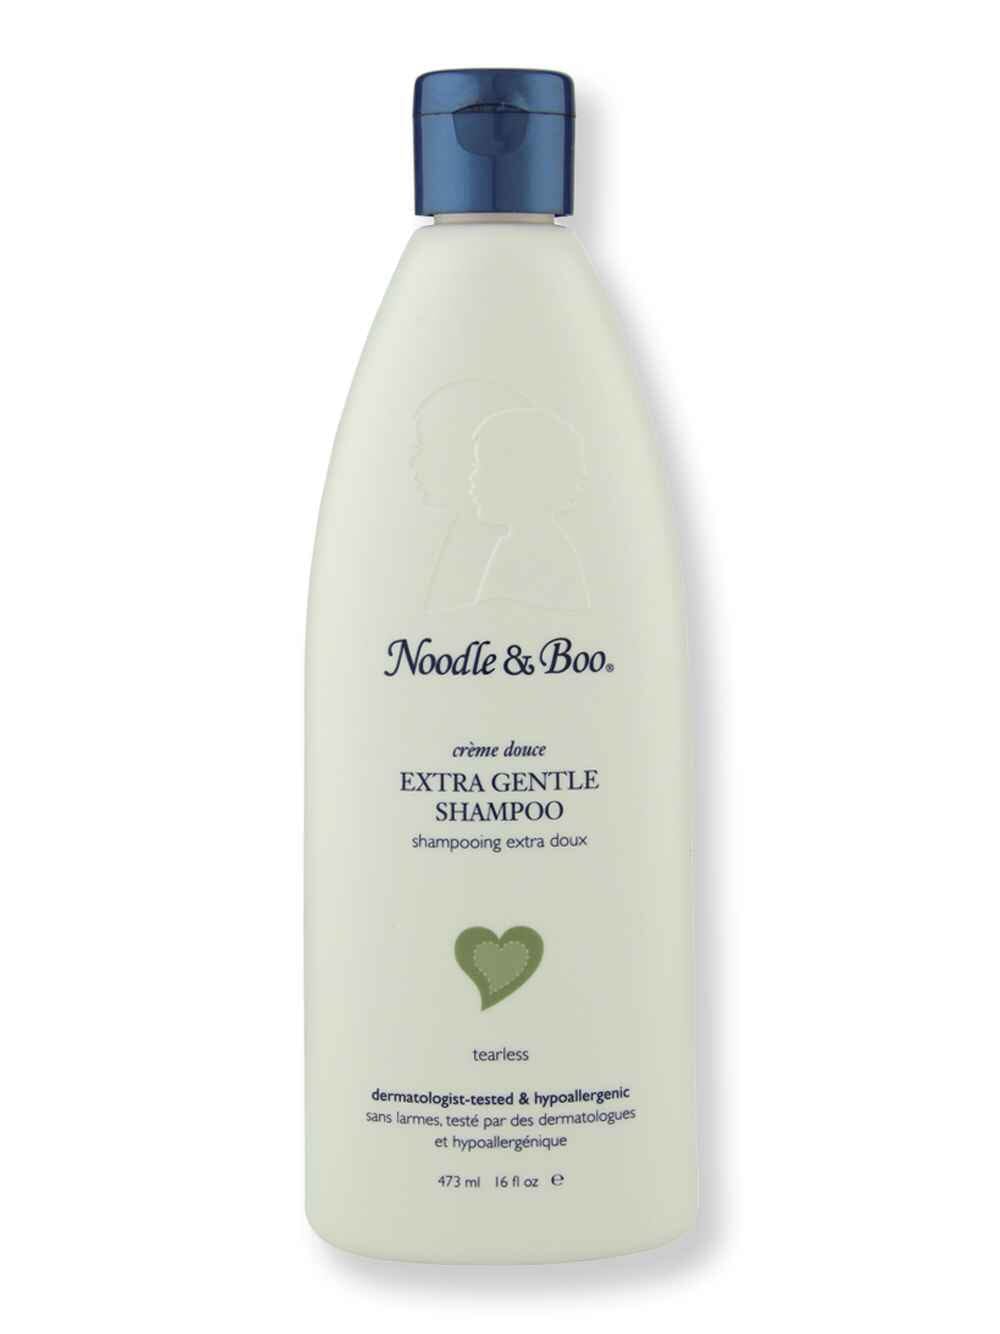 Noodle & Boo Noodle & Boo Extra Gentle Shampoo 16 oz Baby Shampoos & Washes 